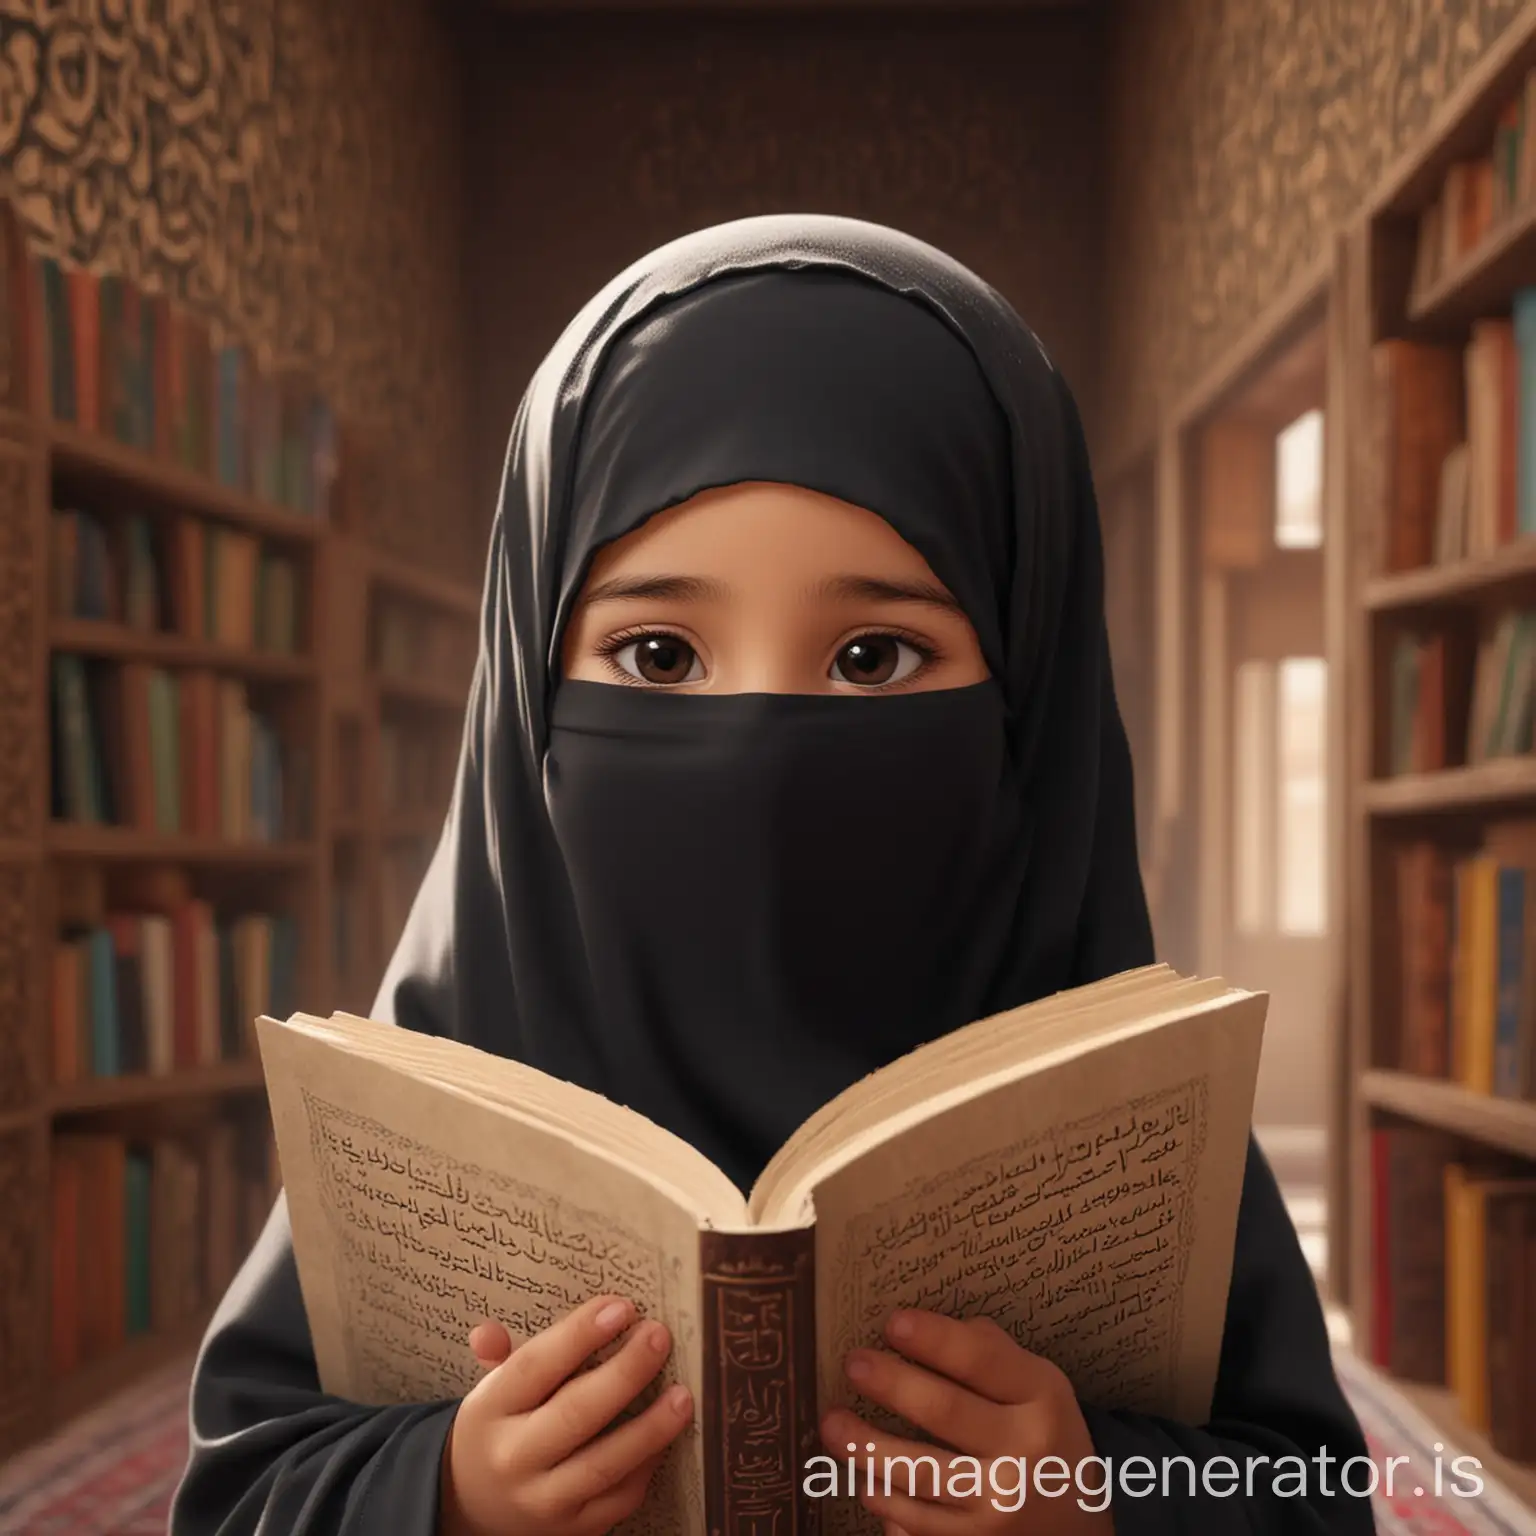 animation of a small child wearing a niqab and a face covering in a closed room showing happiness and Islamic references with a book background